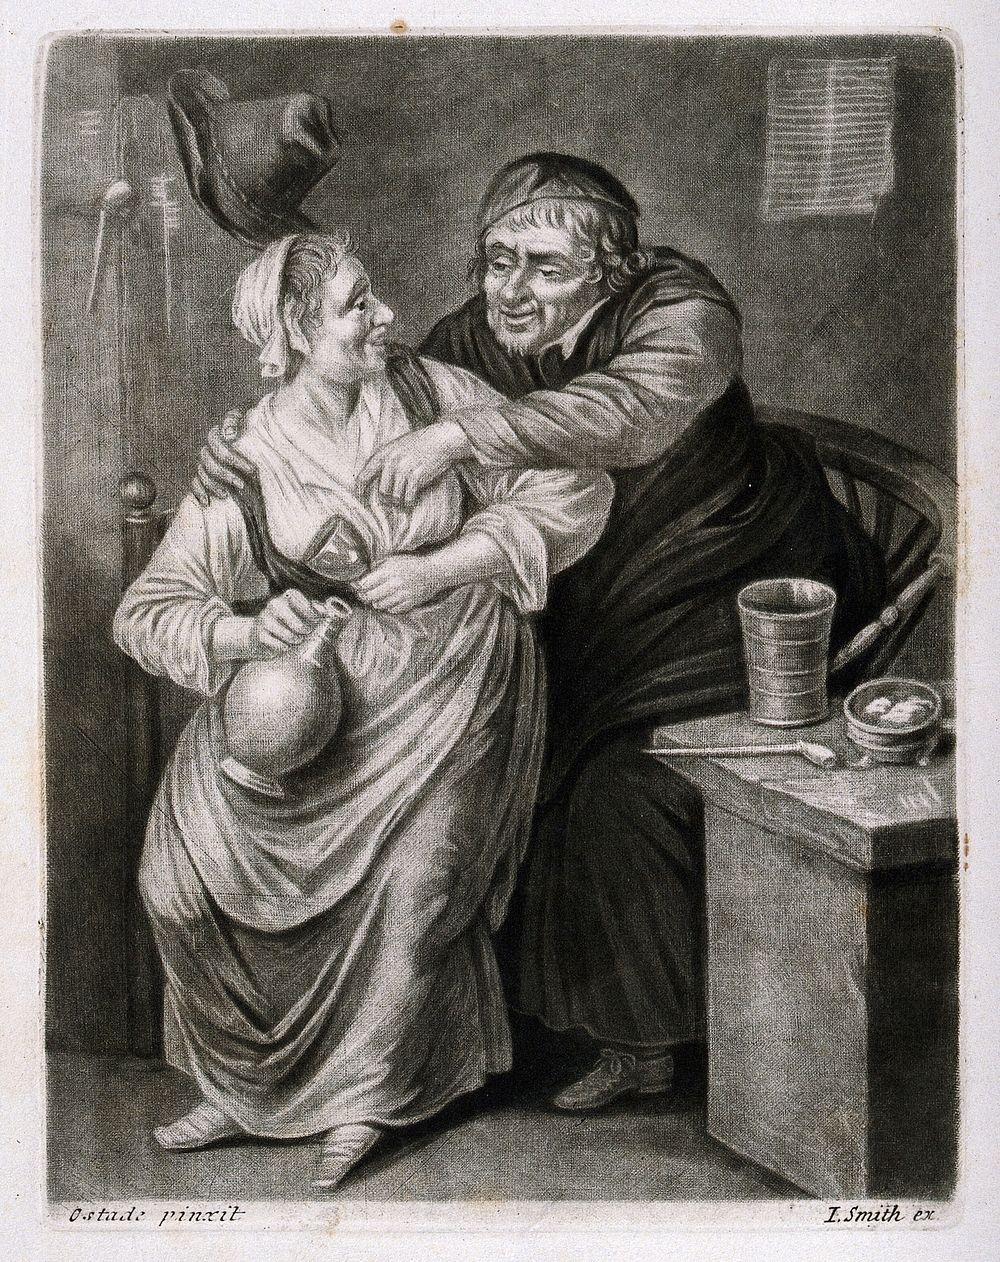 A lecherous old man leans over to a molest a woman who holds a bottle and drinking glass. Mezzotint by J. Smith, c. 1700…